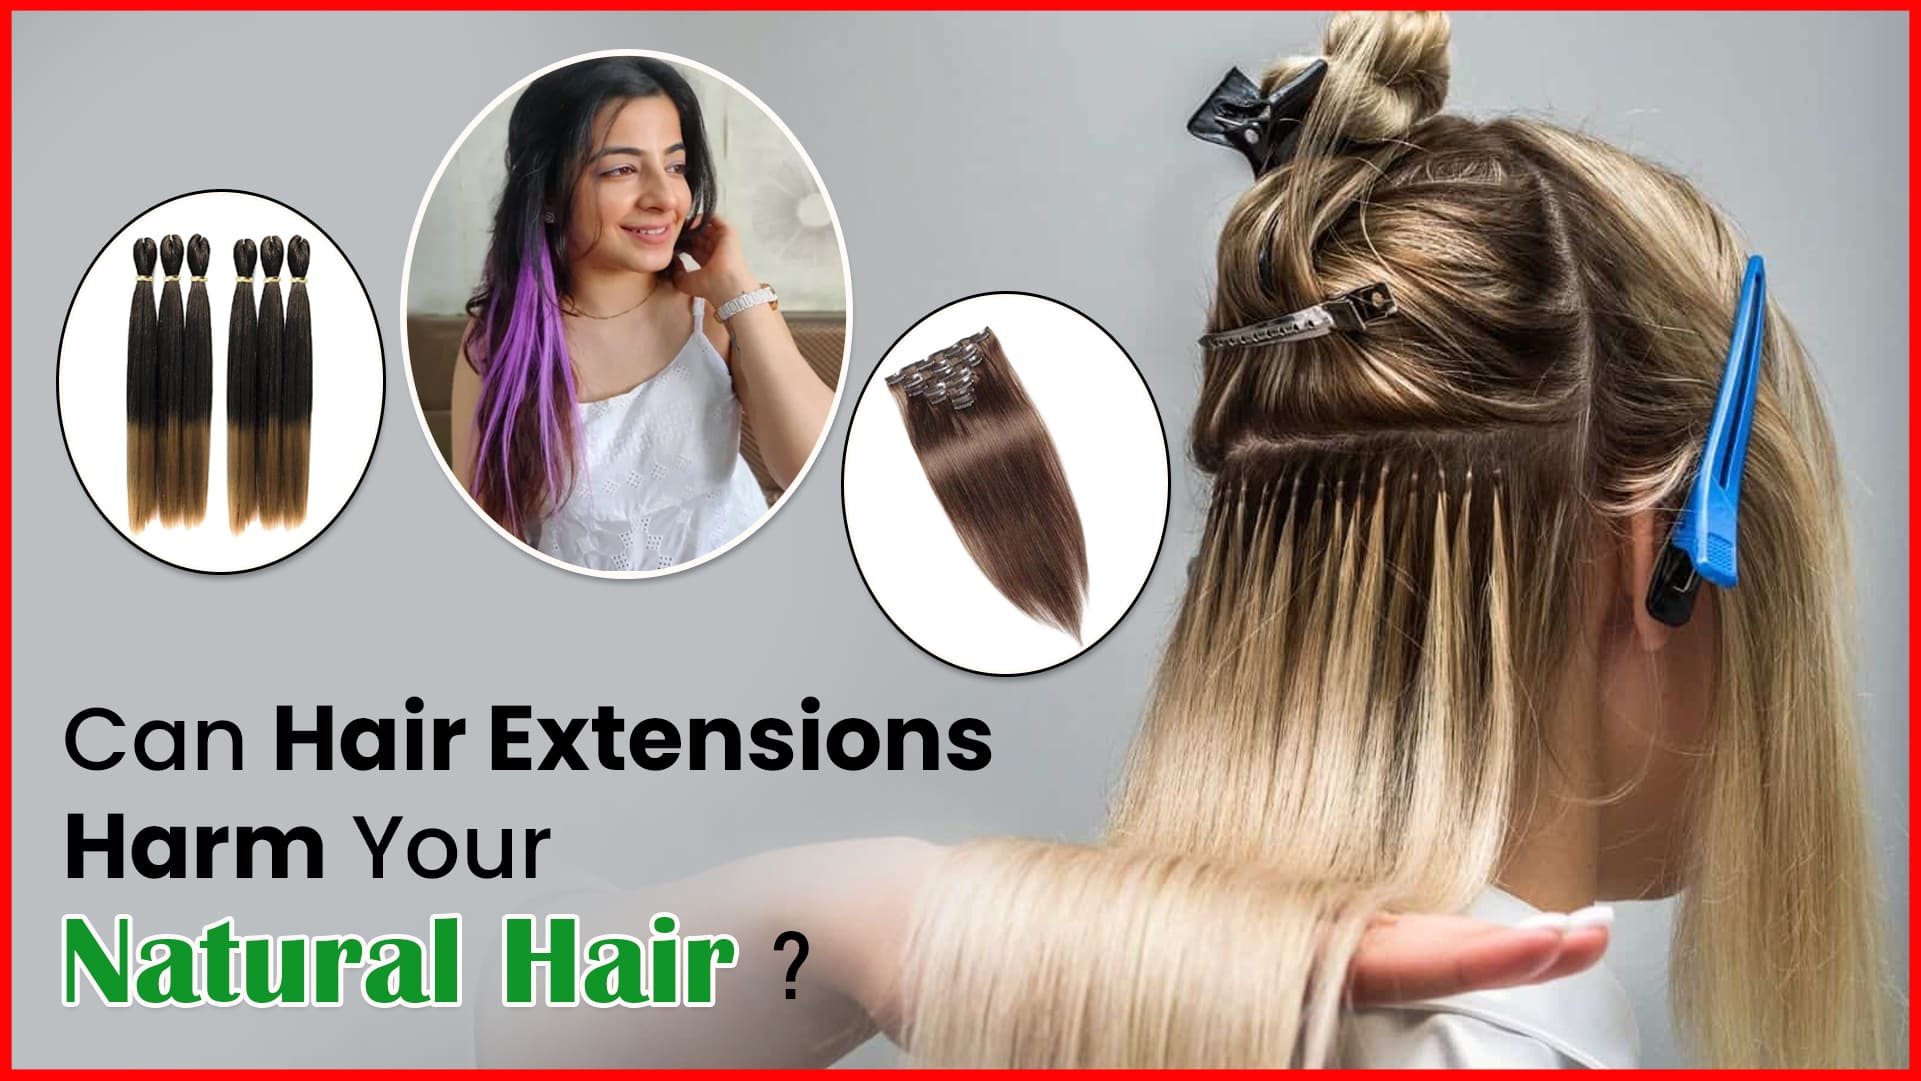 Can 100% human hair extensions harm your natural hair